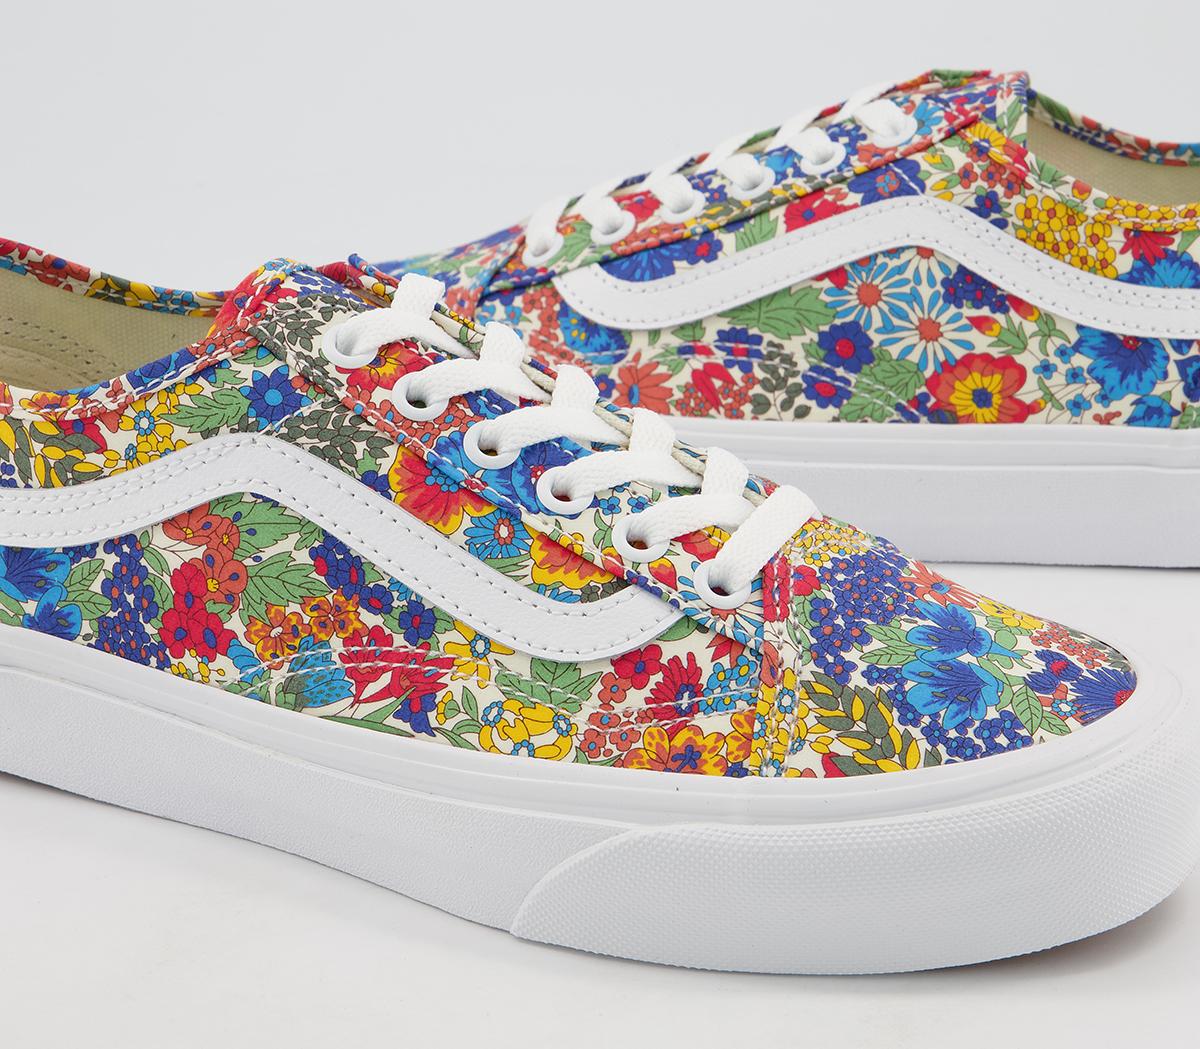 Vans Old Skool Trainers Liberty Multi Yellow Floral - Women's Trainers